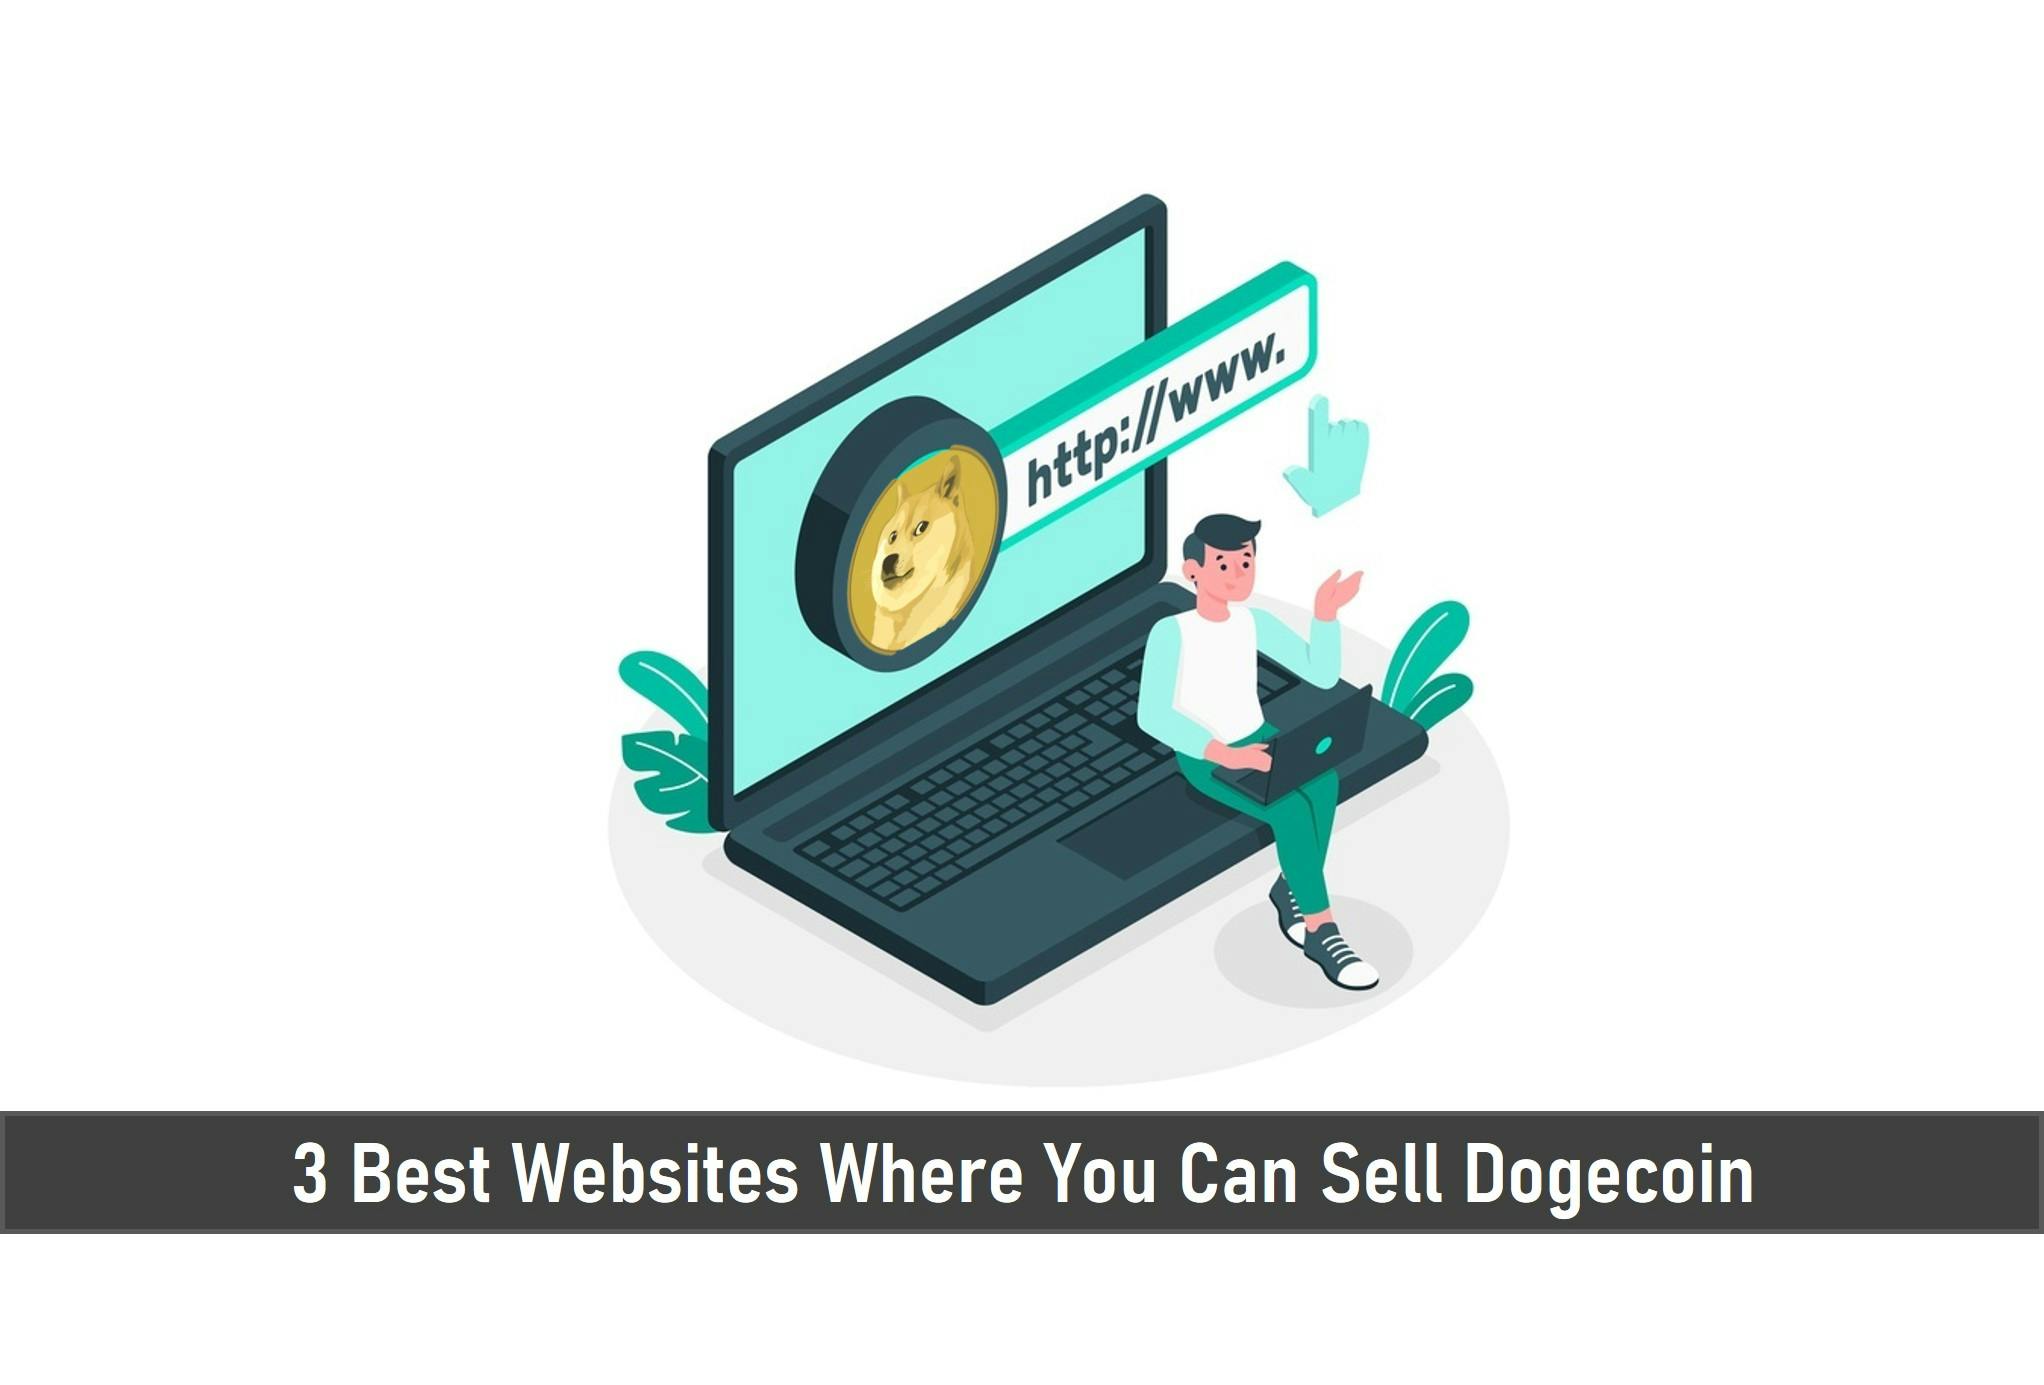 3 Best Websites Where You Can Sell Dogecoin